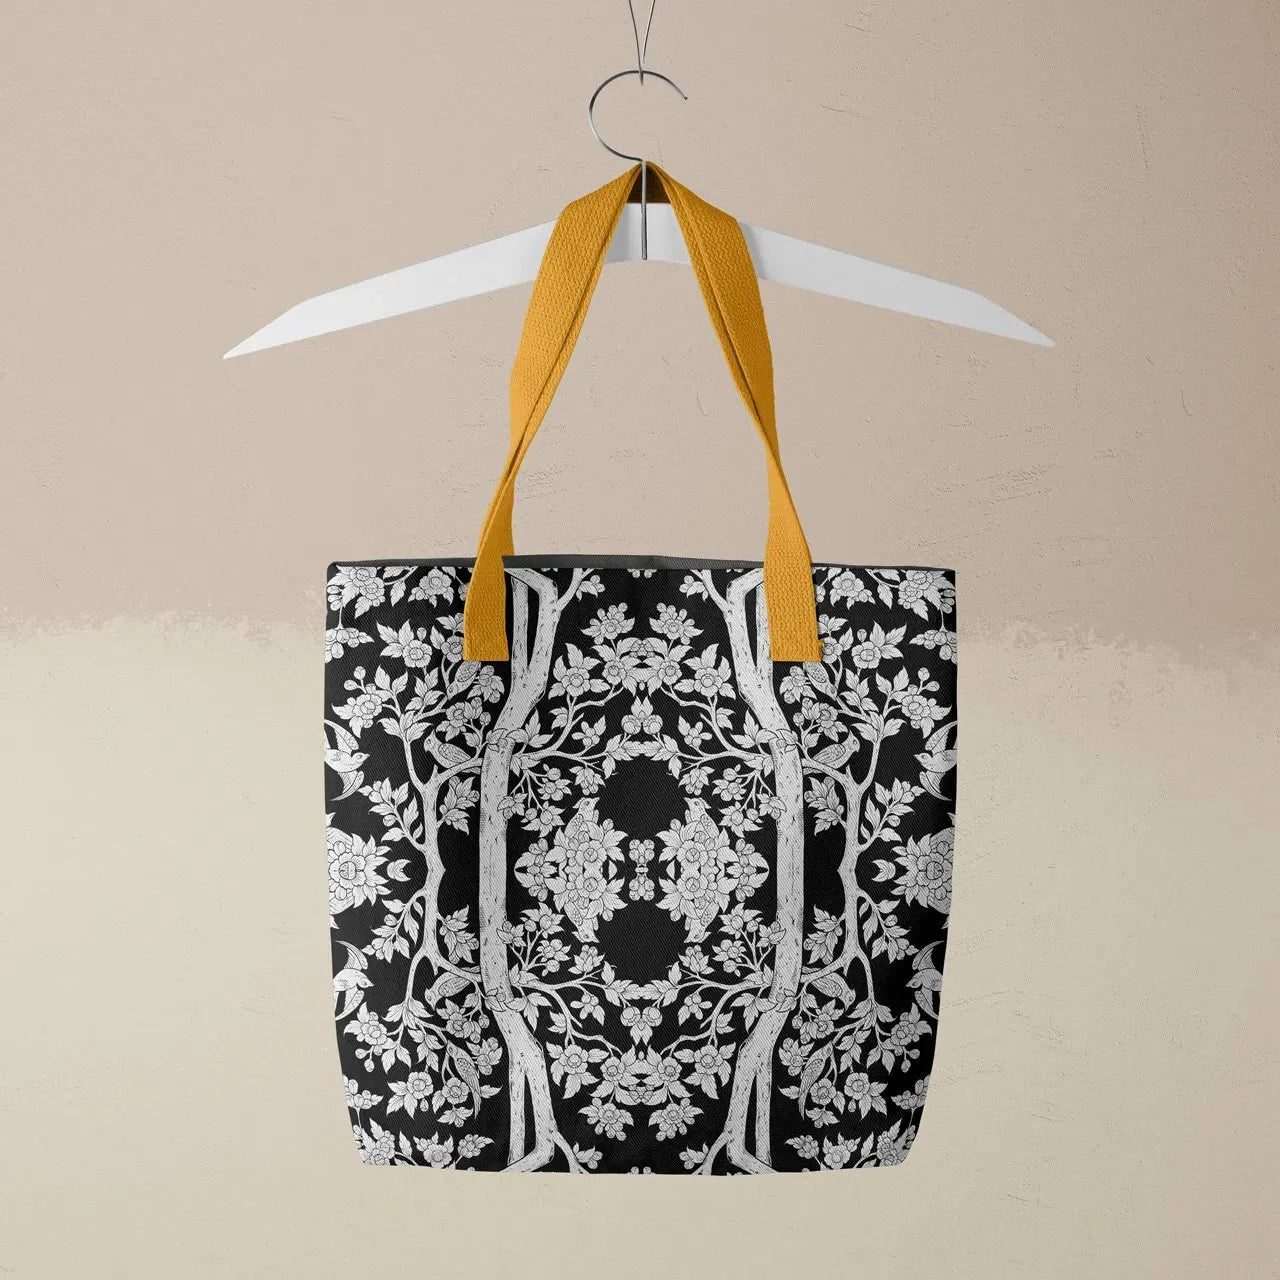 Aviary Tote - Raven - Heavy Duty Reusable Grocery Bag - Yellow Handles - Shopping Totes - Aesthetic Art